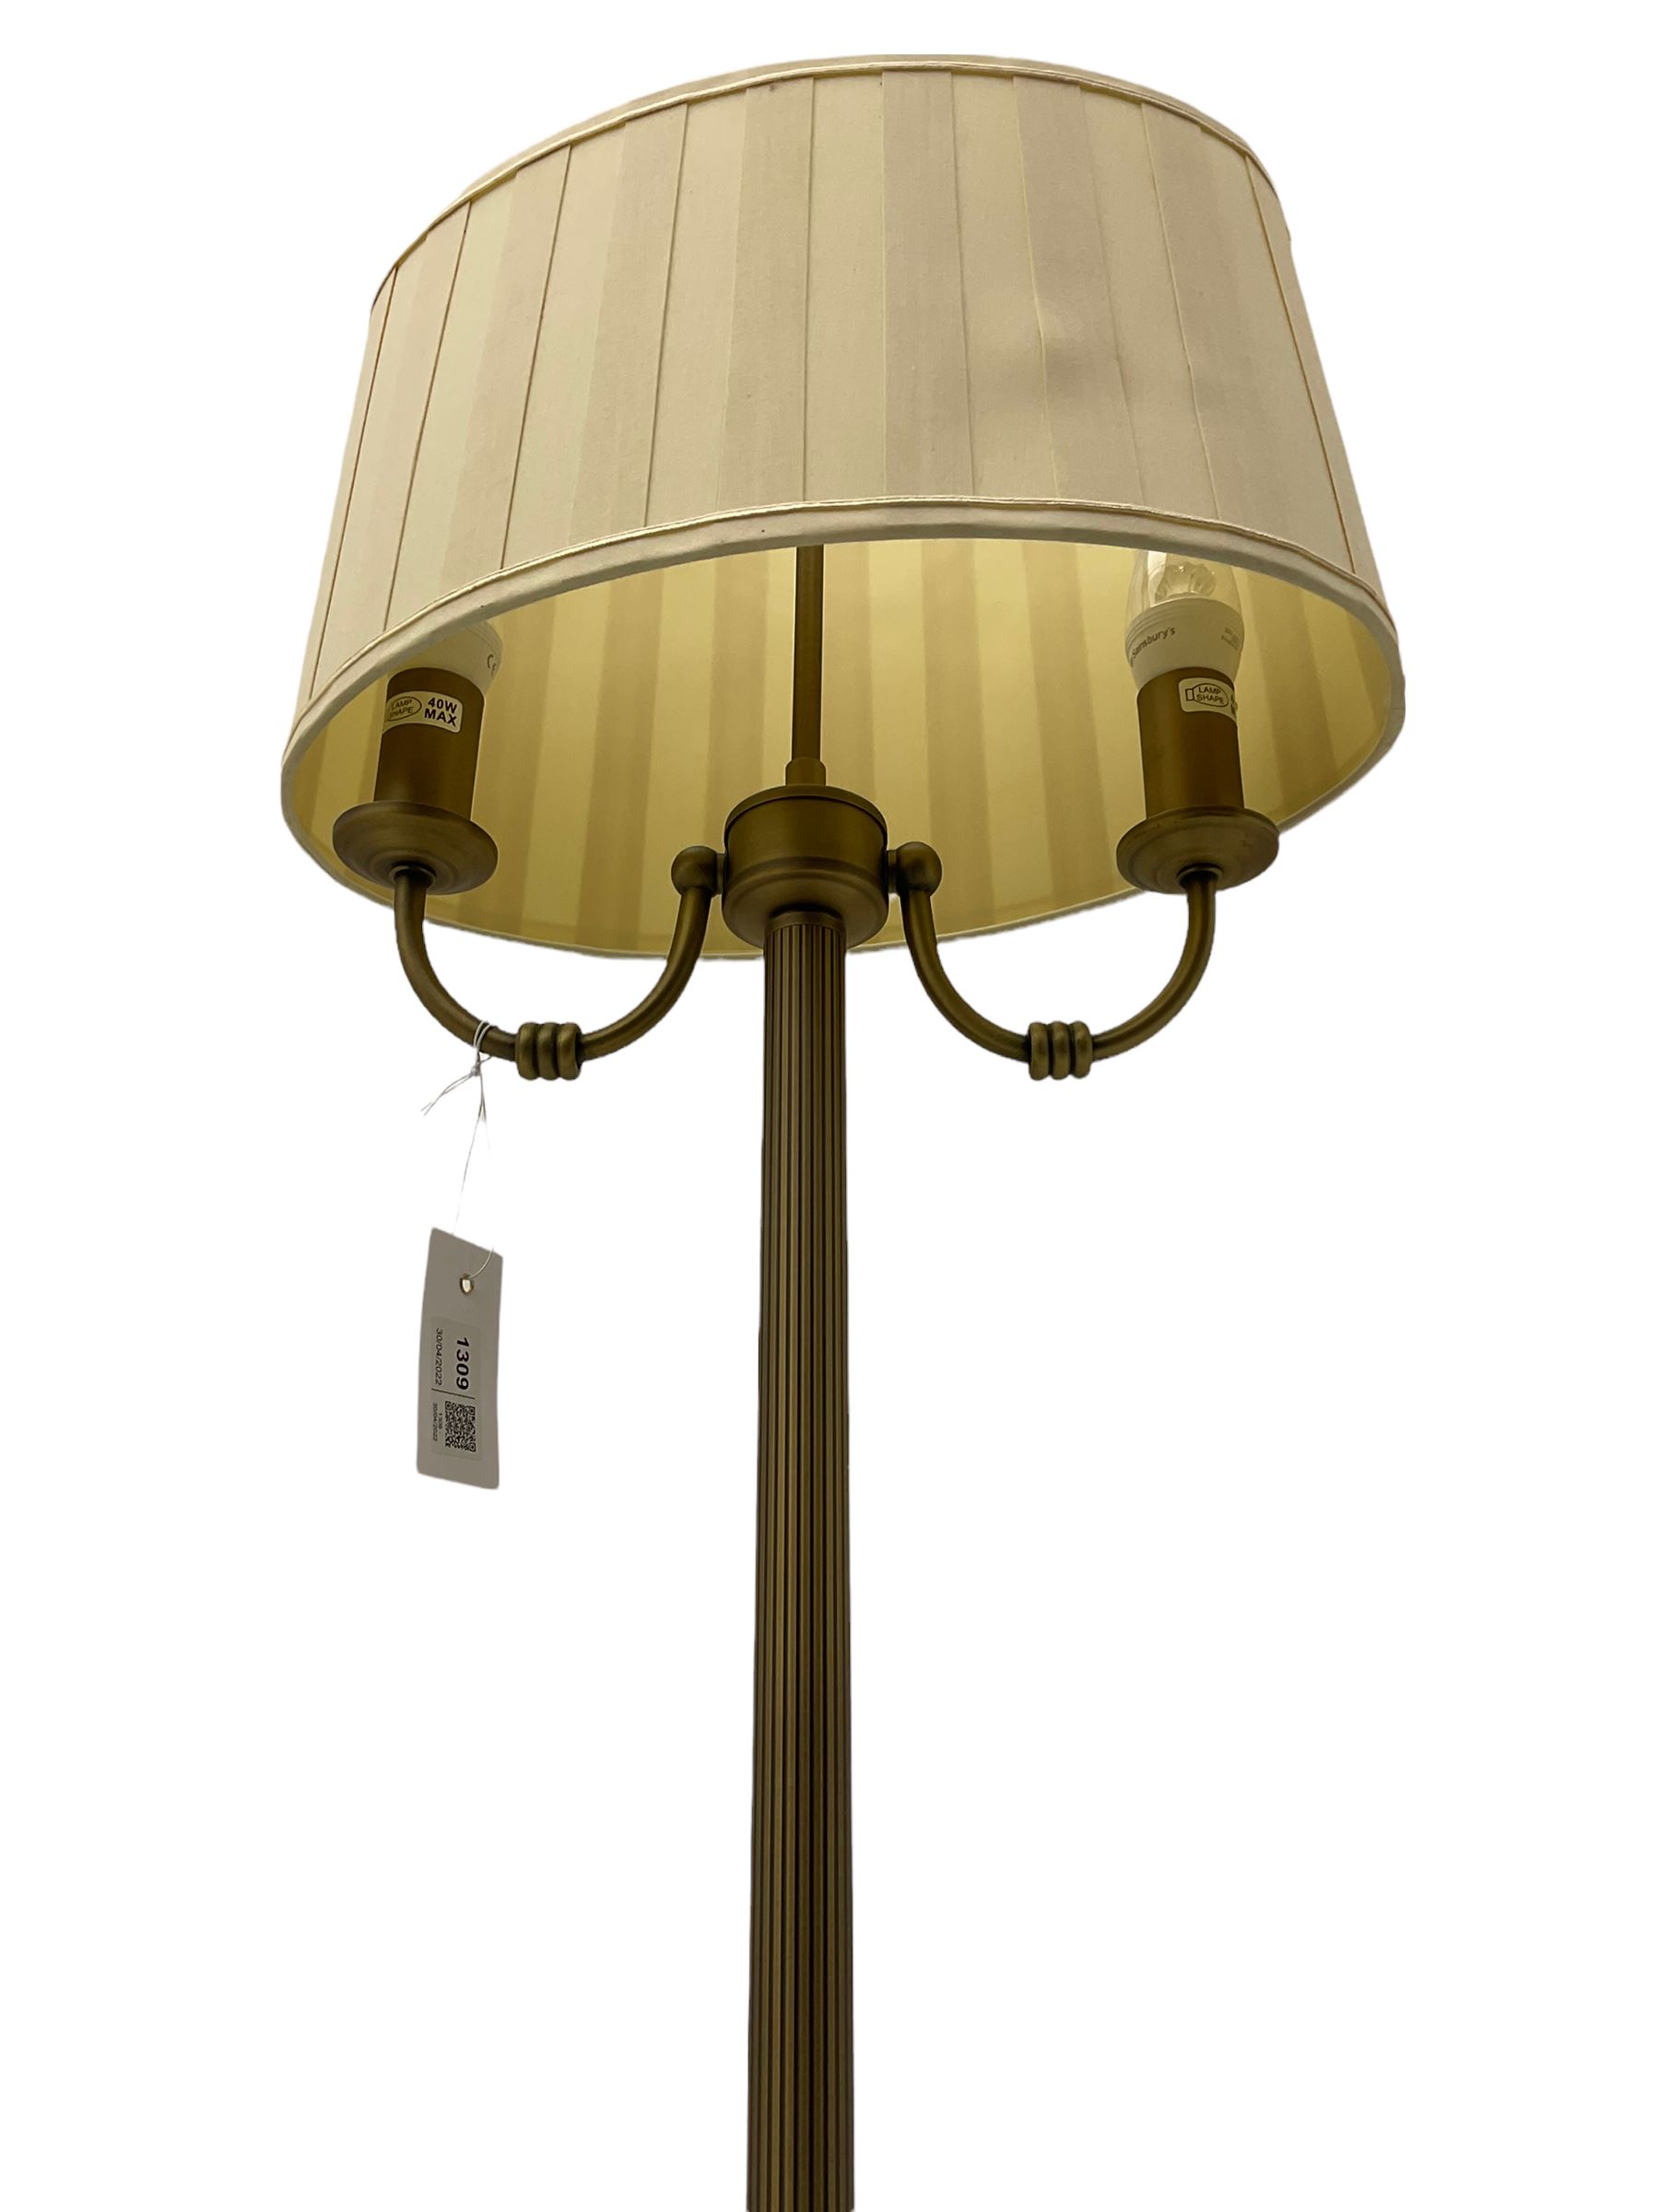 Twin branch standard lamp with shade - Image 2 of 5